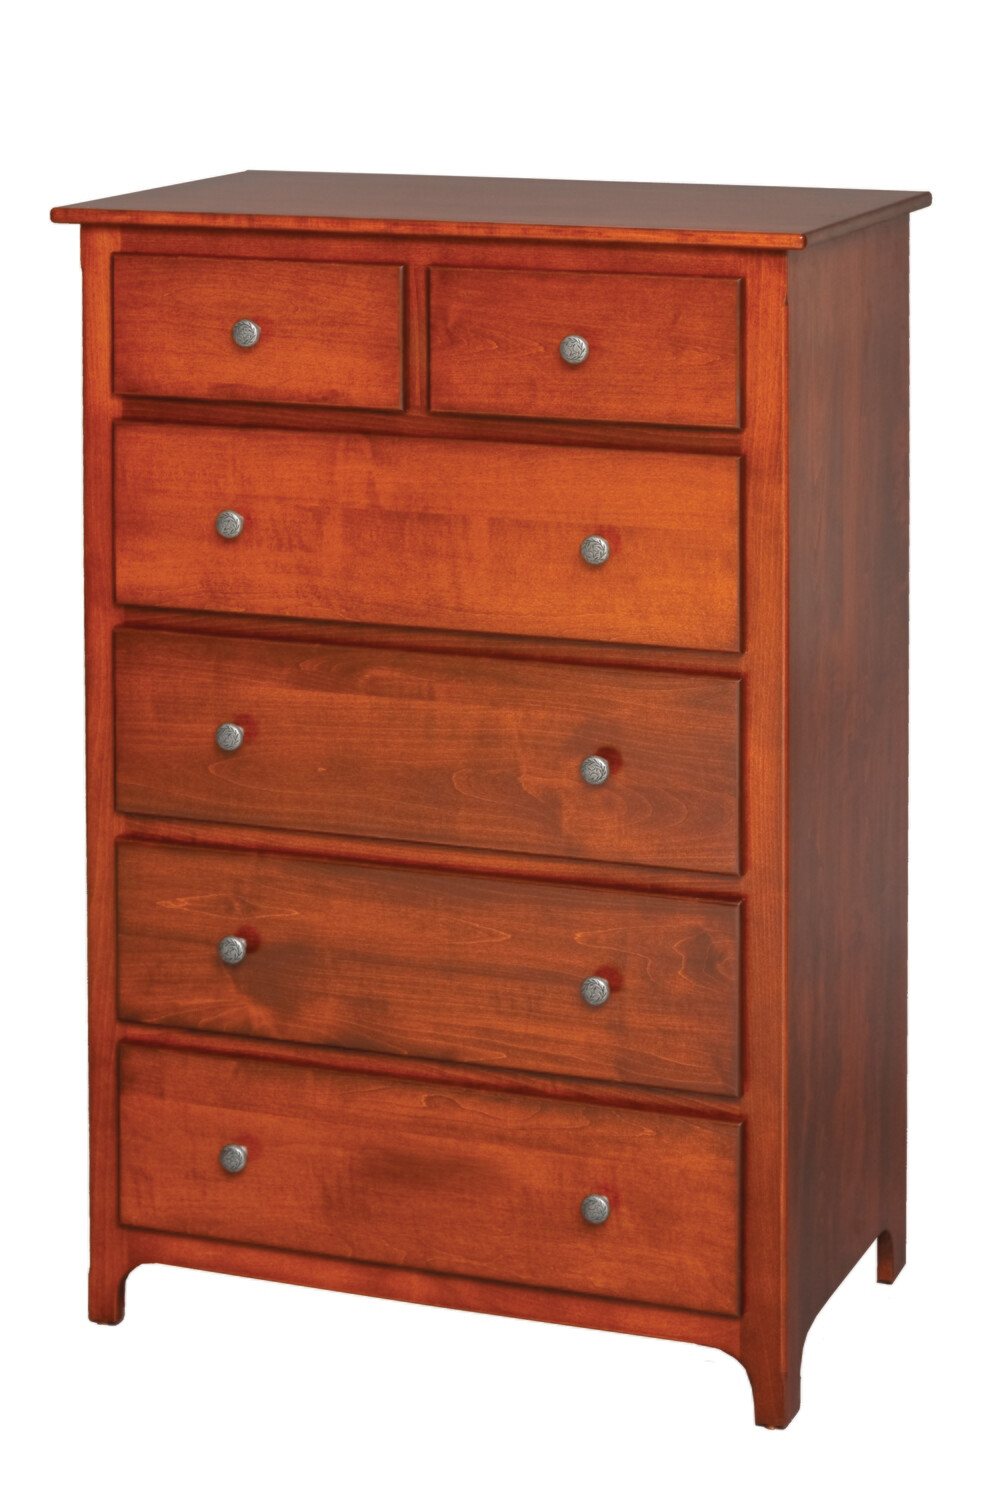 Plymouth Chest of Drawers